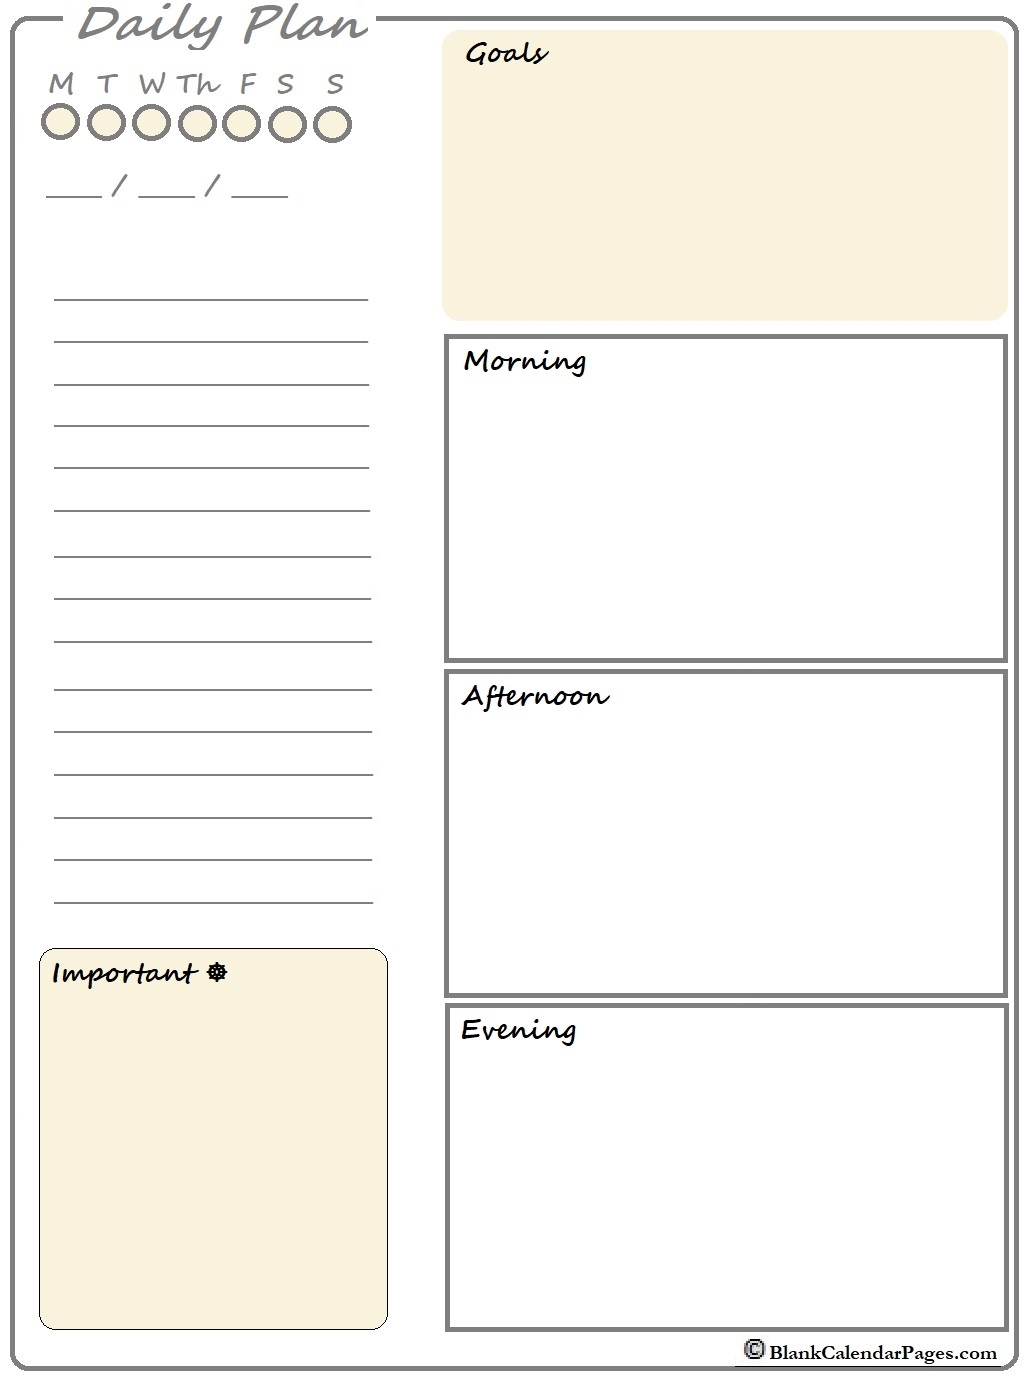 2020 Printable Daily Planner | Planner Templates Calendar Template Daily Planner